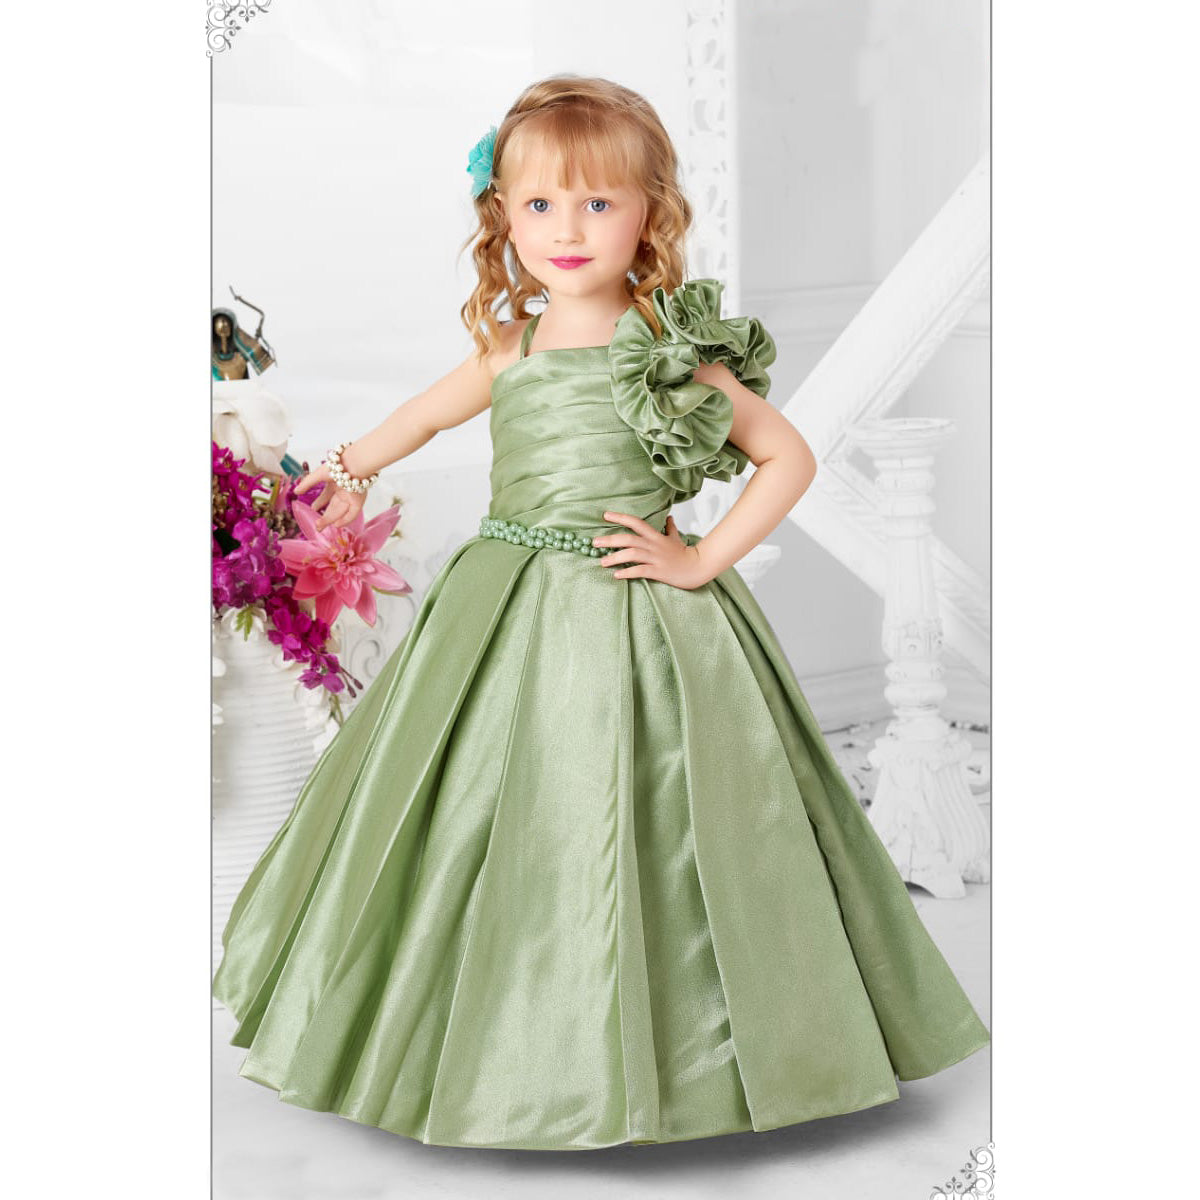 Designer party wear gown for girls|shop now online | Gowns for girls, Baby  girl dresses fancy, Princess ball gowns